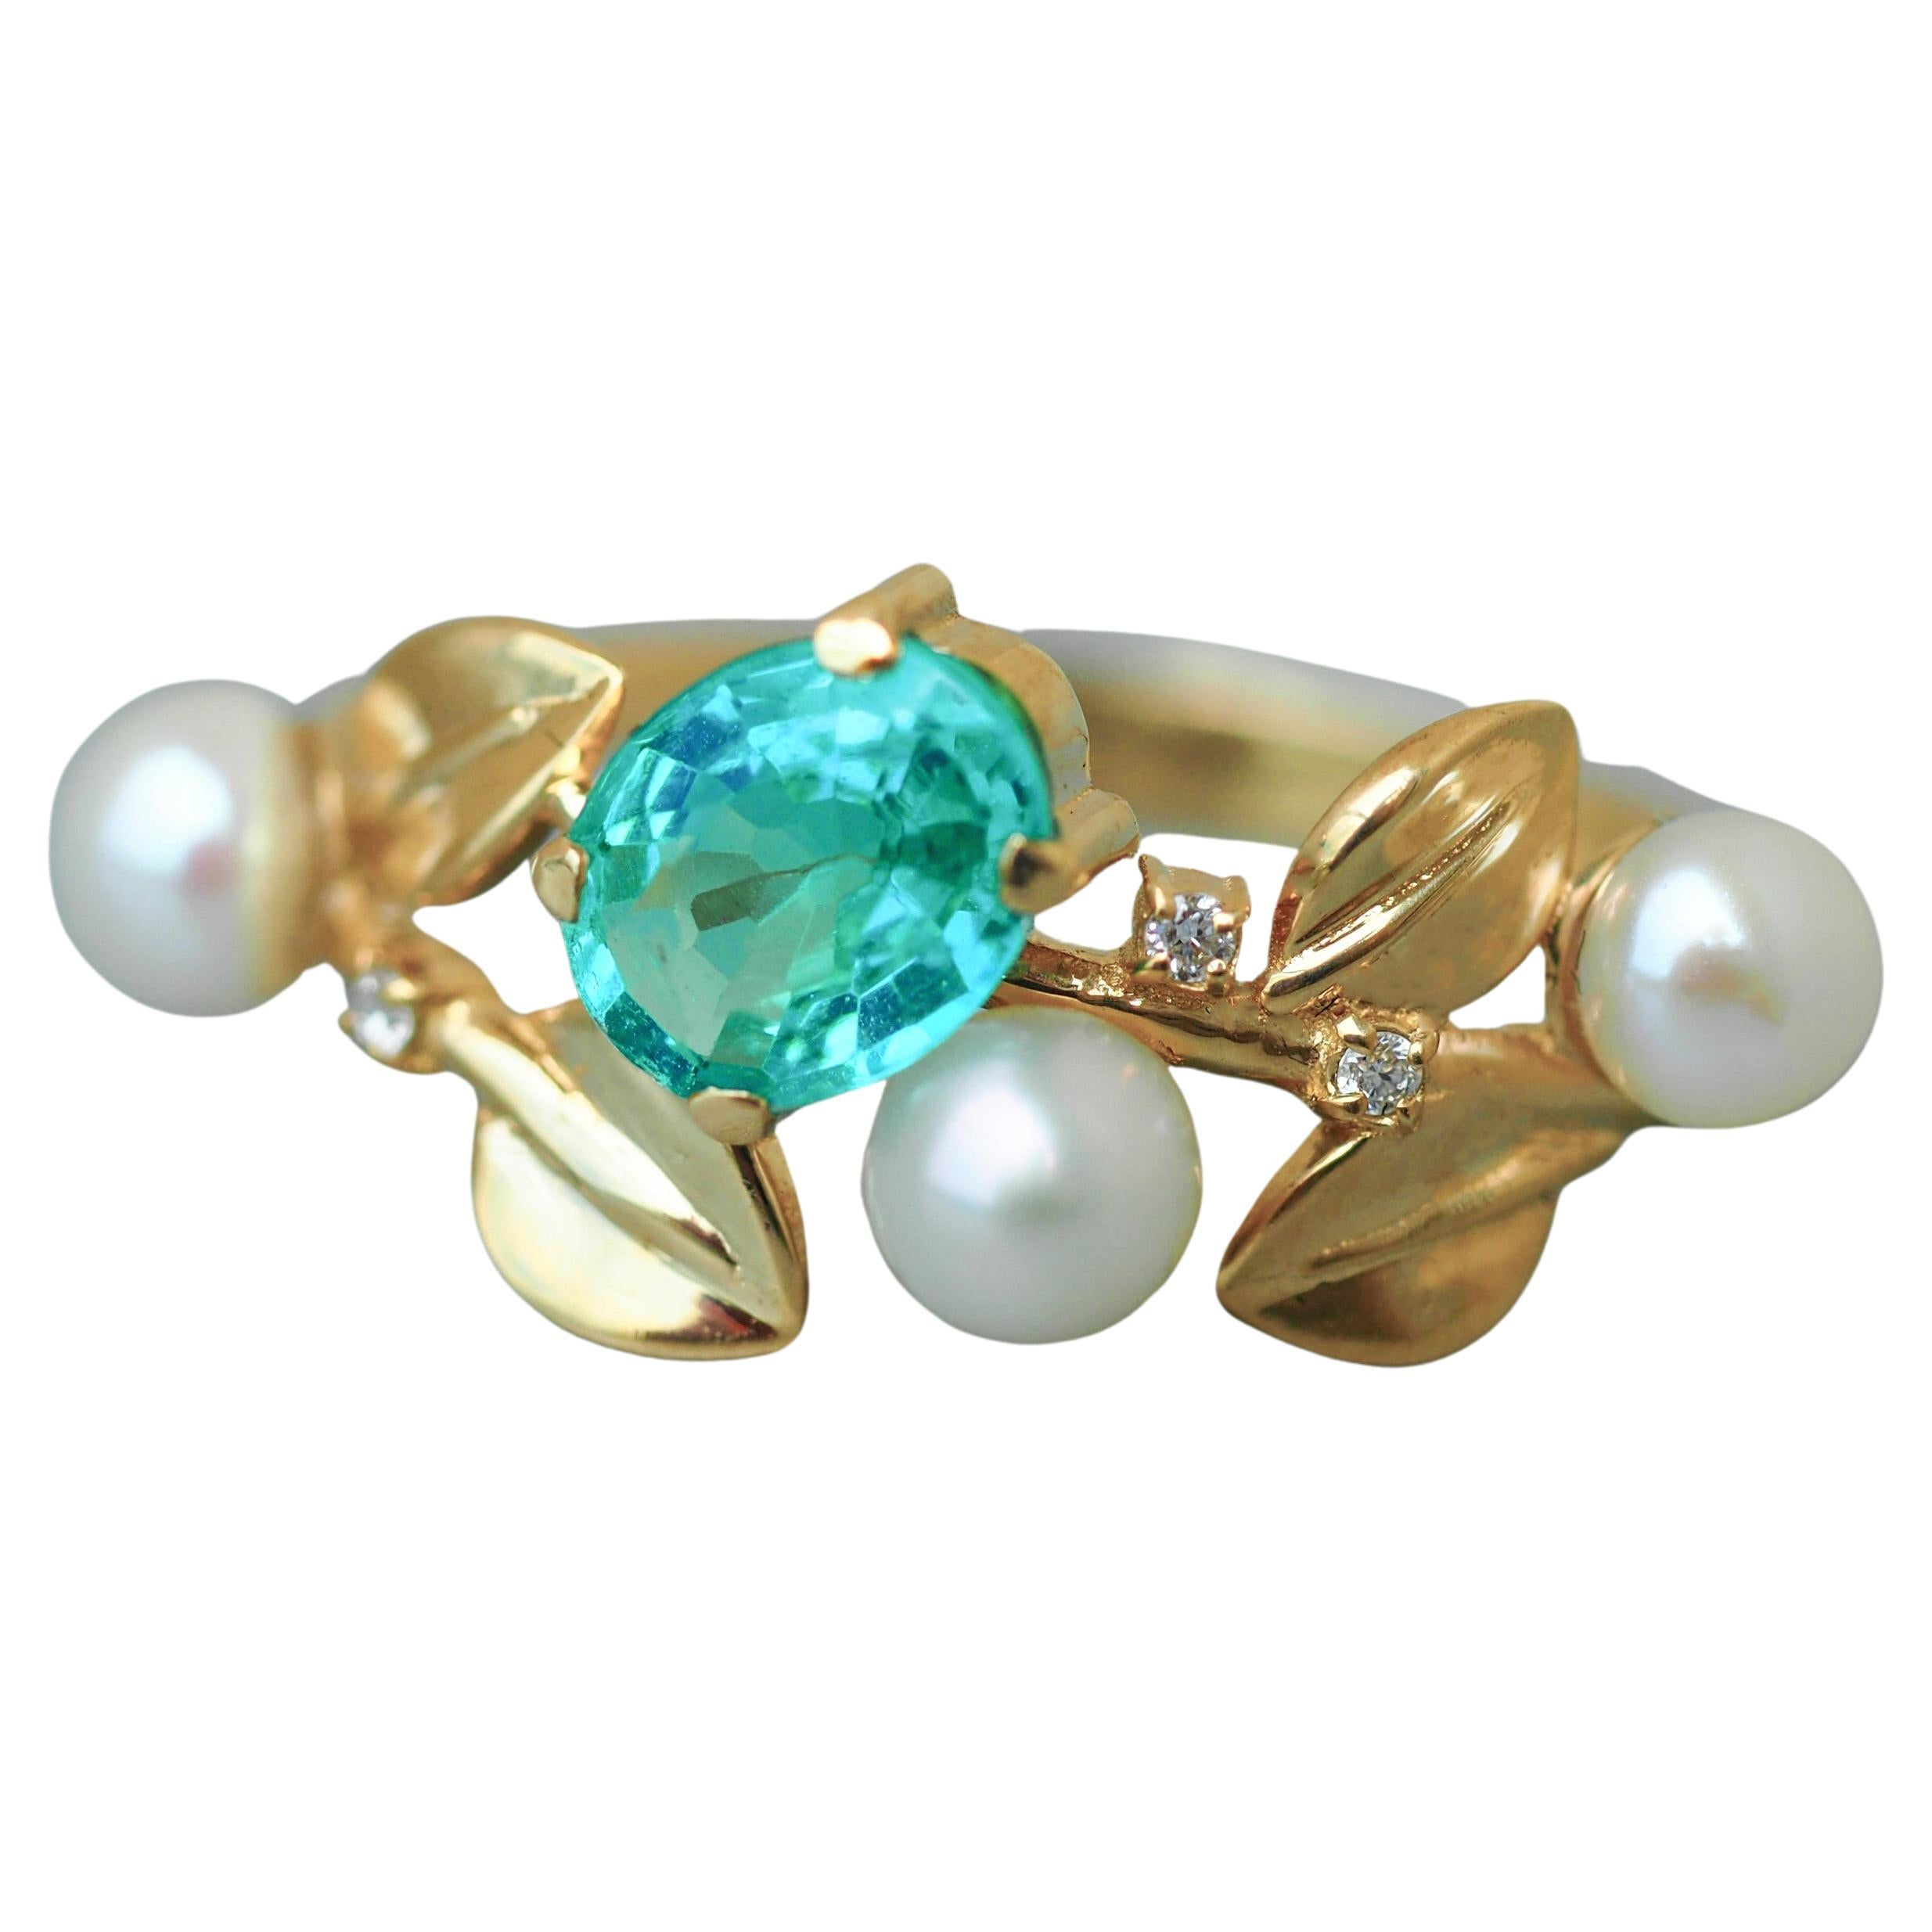 14k gold floral ring with oval neon paraiba apatite, diamonds and pearls.  For Sale